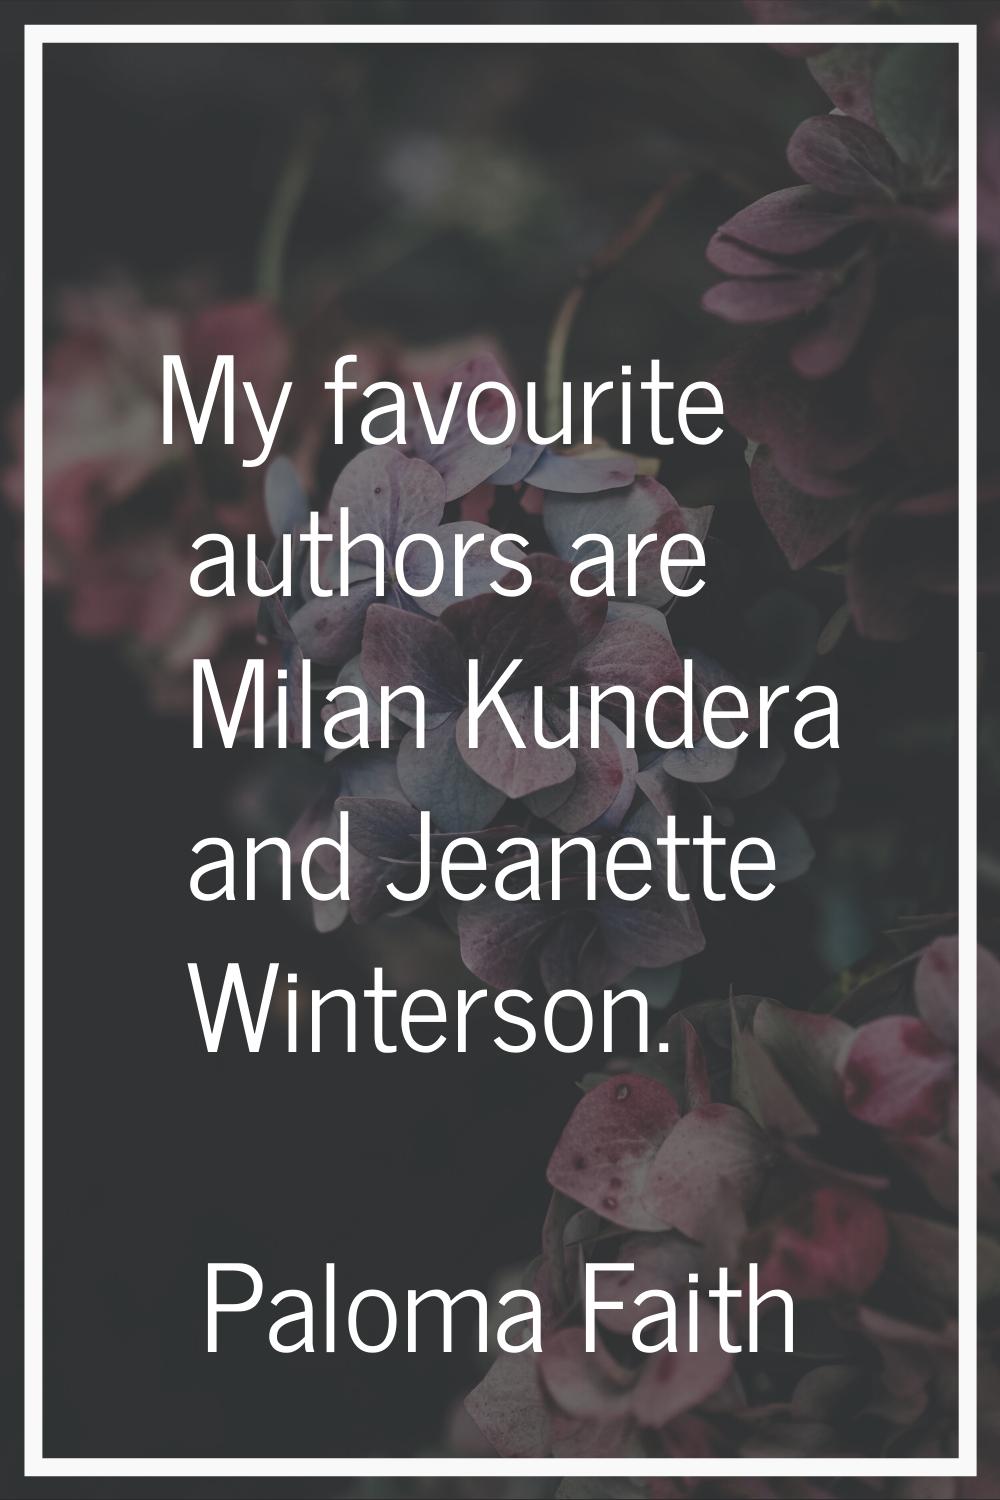 My favourite authors are Milan Kundera and Jeanette Winterson.